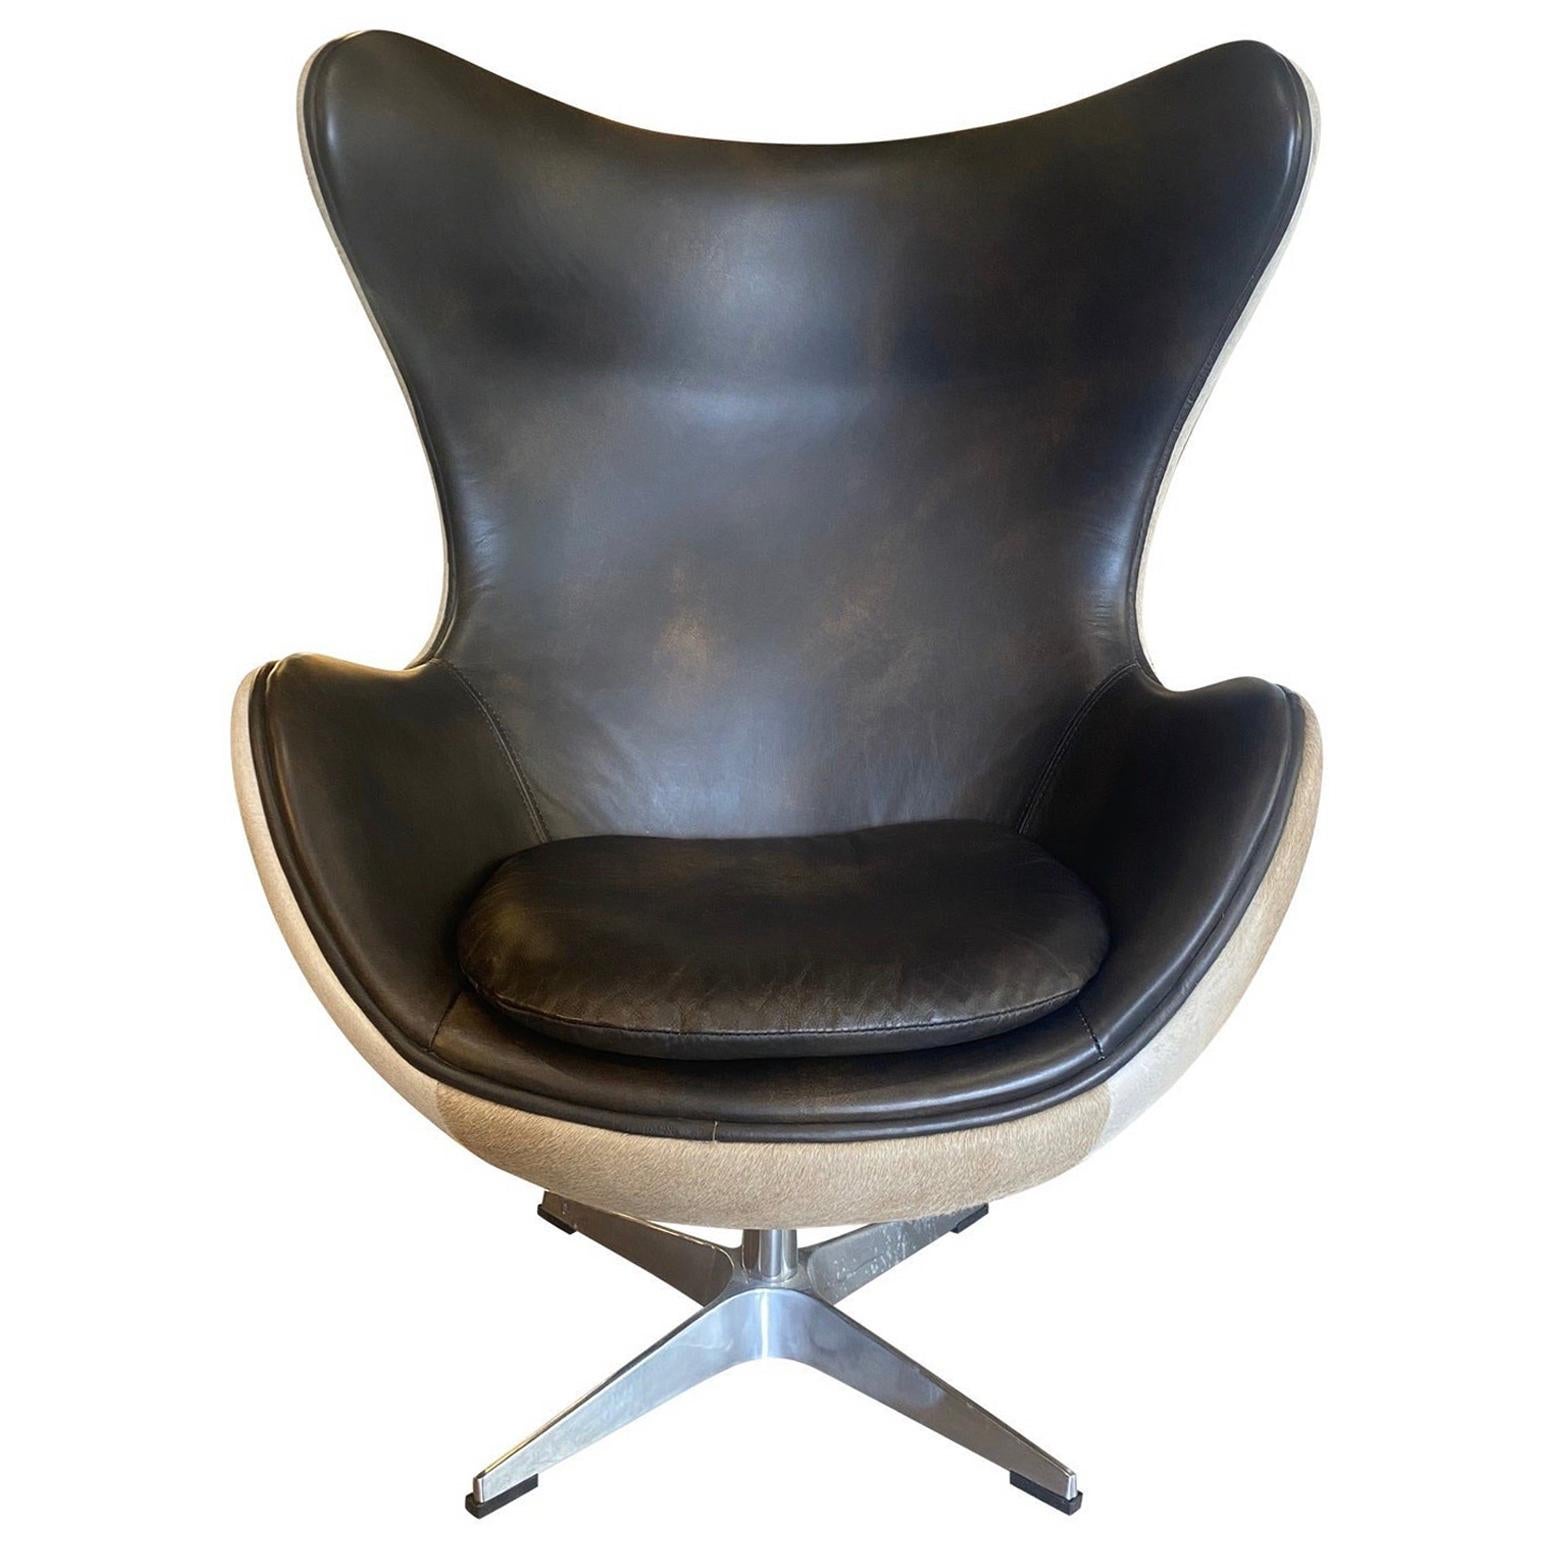 Fritz Hansen Arne Jacobsen Styled Egg Chair with Dark Leather and Pony Hair